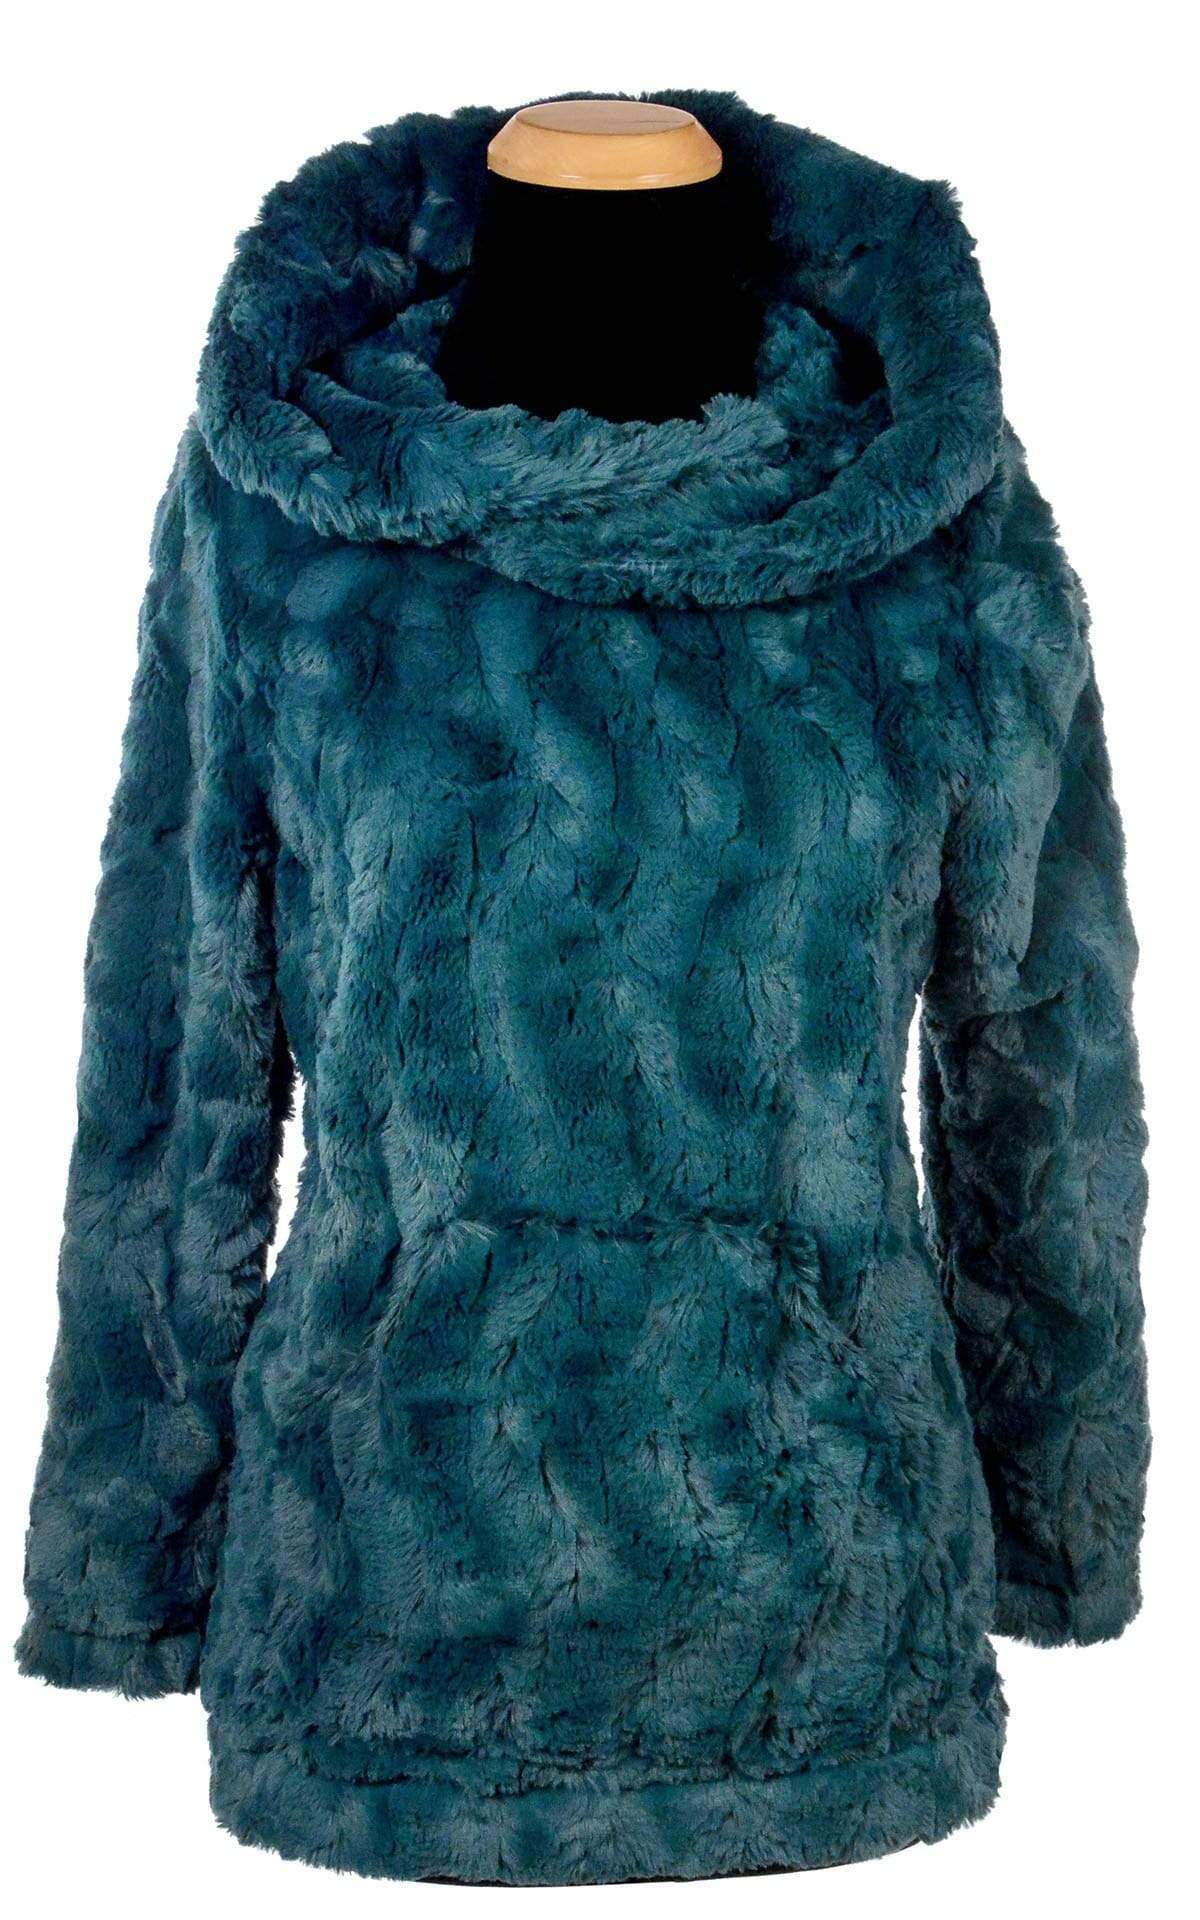 Hooded Lounger with Hood Up | Peacock Pond Faux Fur | Pandemonium Millinery USA